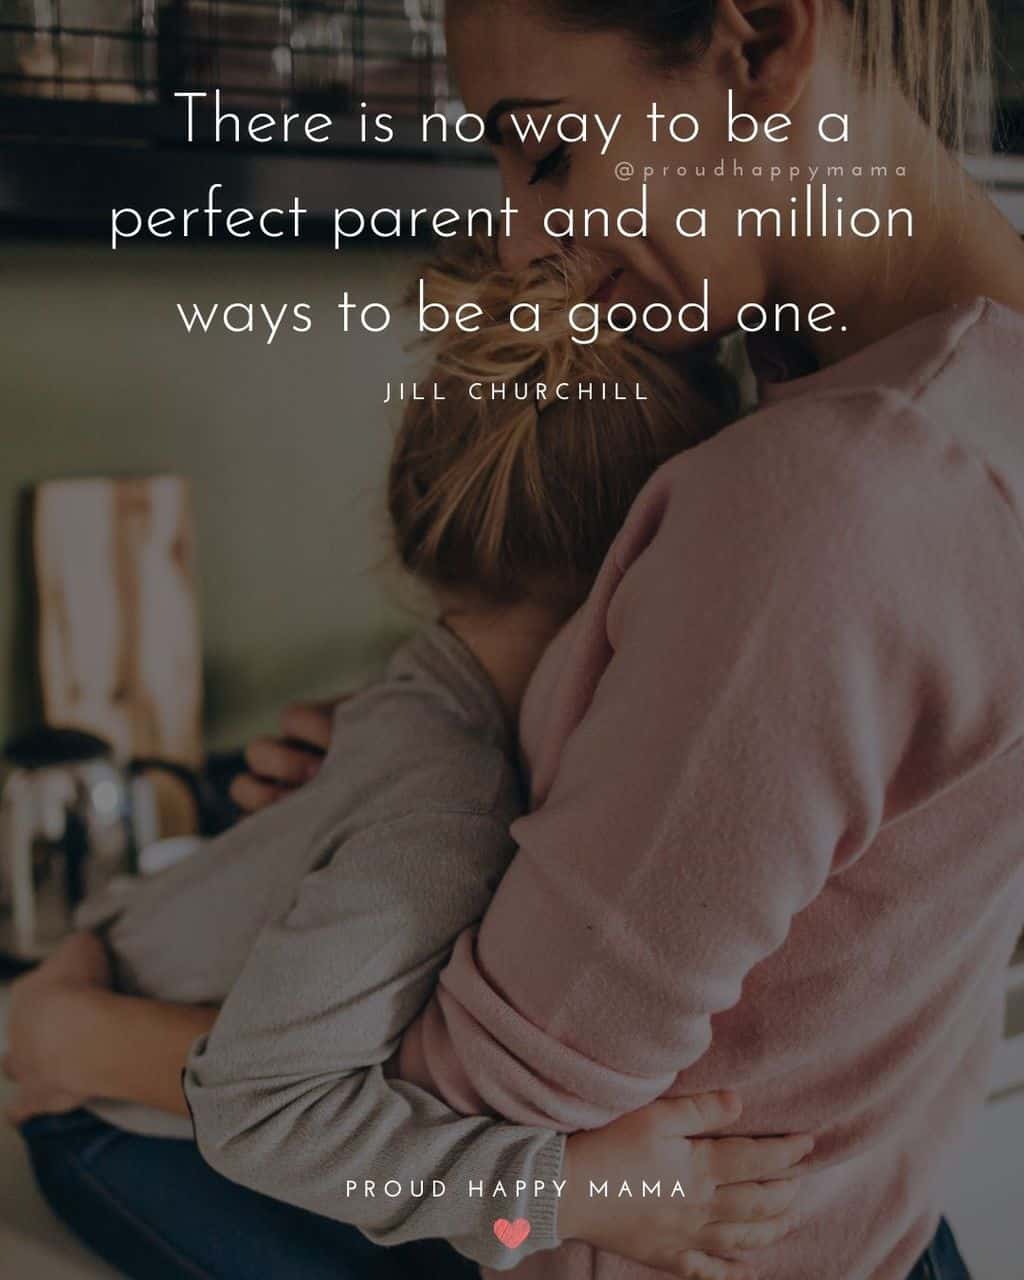 Parenting Quotes - There is no way to be a perfect parent and a million ways to be a good one.’ – Jill Churchill